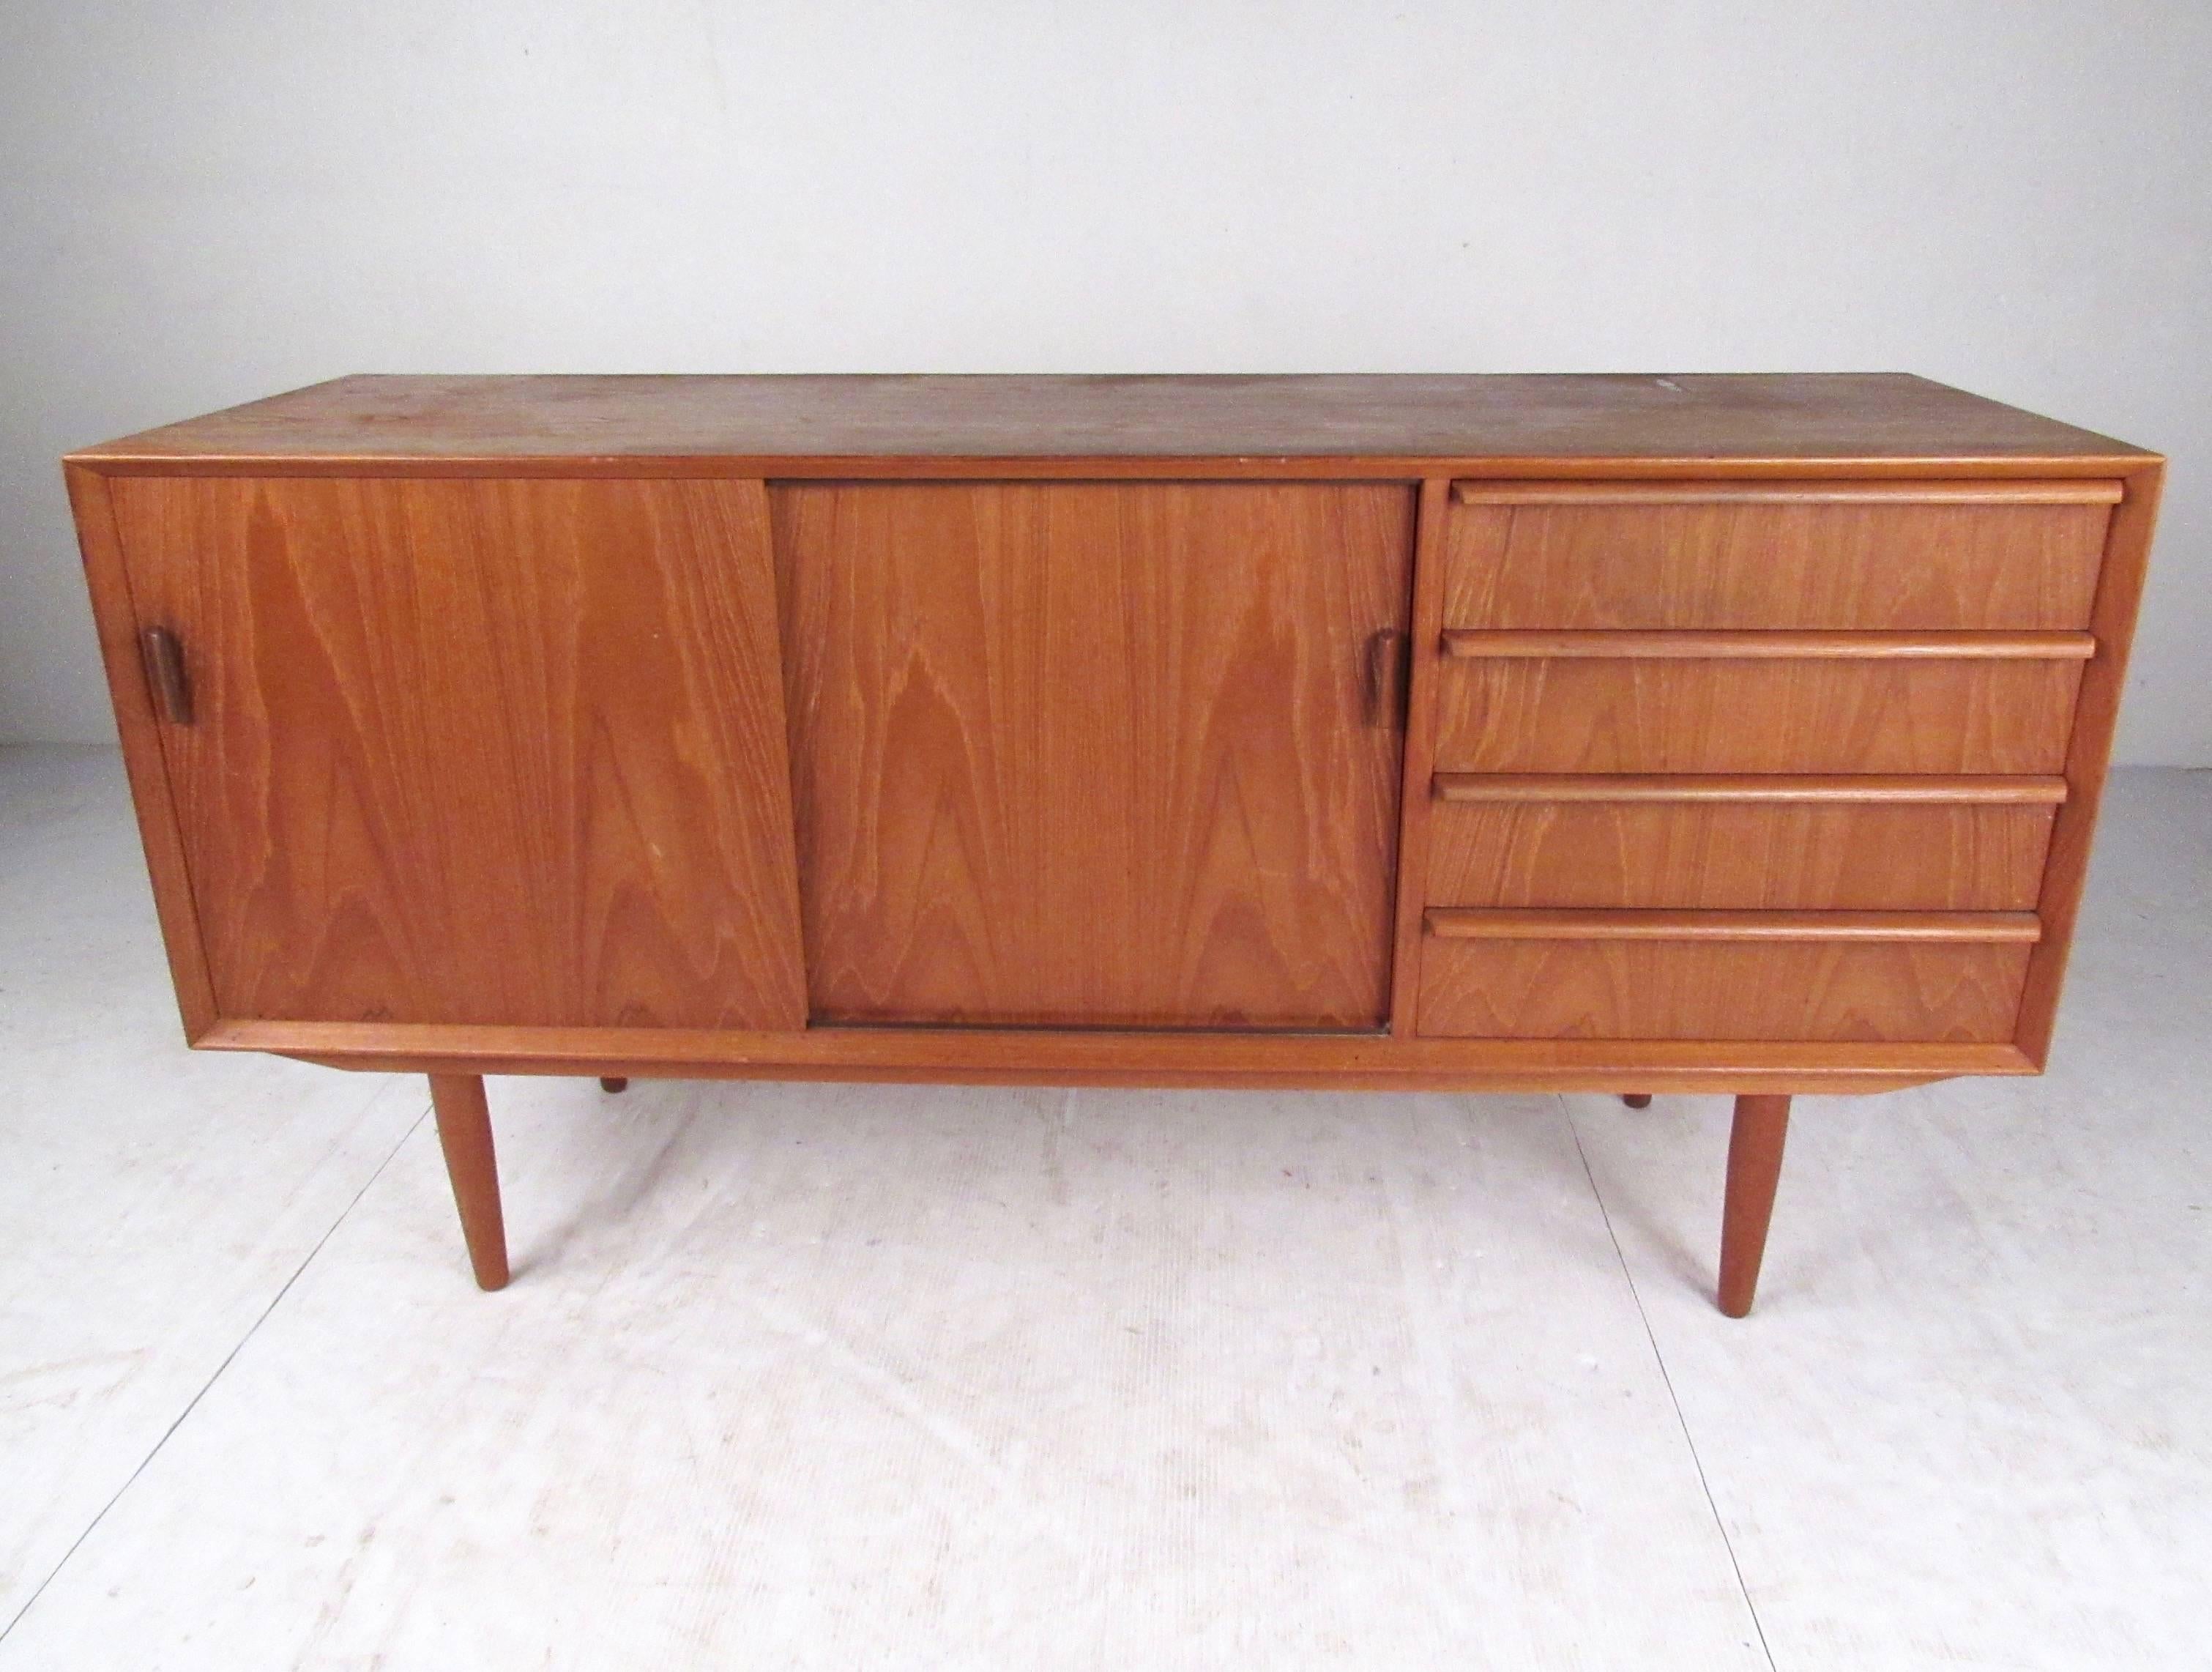 This stylish Danish modern credenza by Falster makes a stylish storage cabinet for home or office storage. A versatile mix of storage includes sliding door cabinets and dovetailed drawers, this small-scale credenza features carved pulls and rich